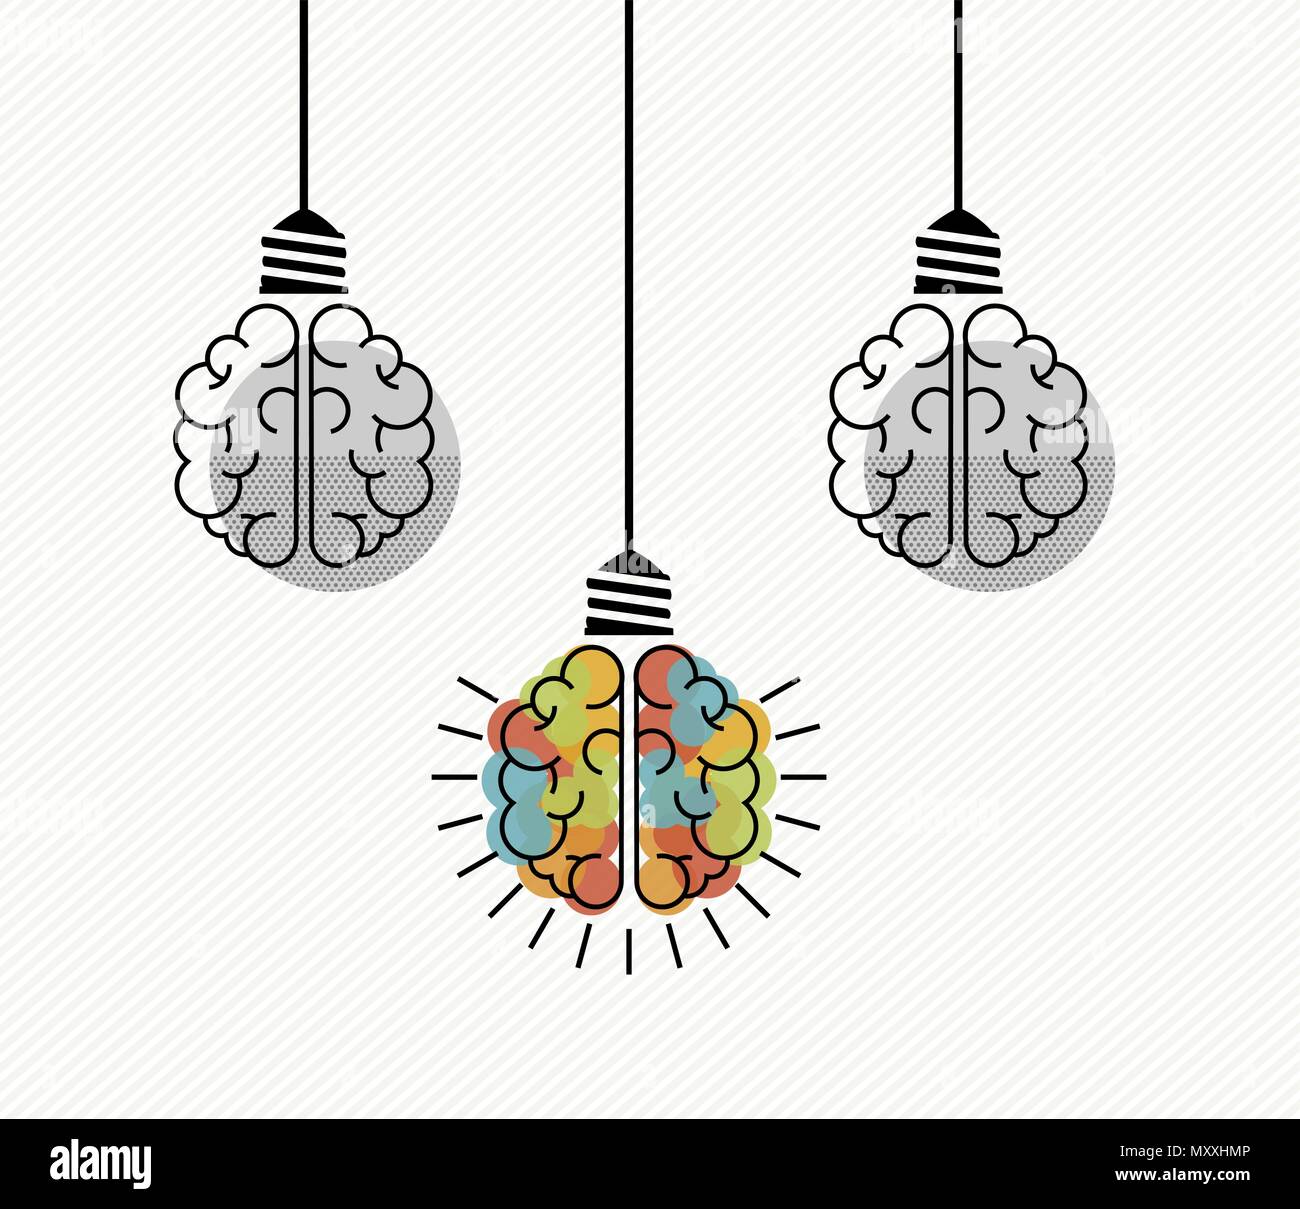 Creative thinking concept illustration of human brain as electric light bulb for business solutions, brainstorming. EPS10 vector. Stock Vector